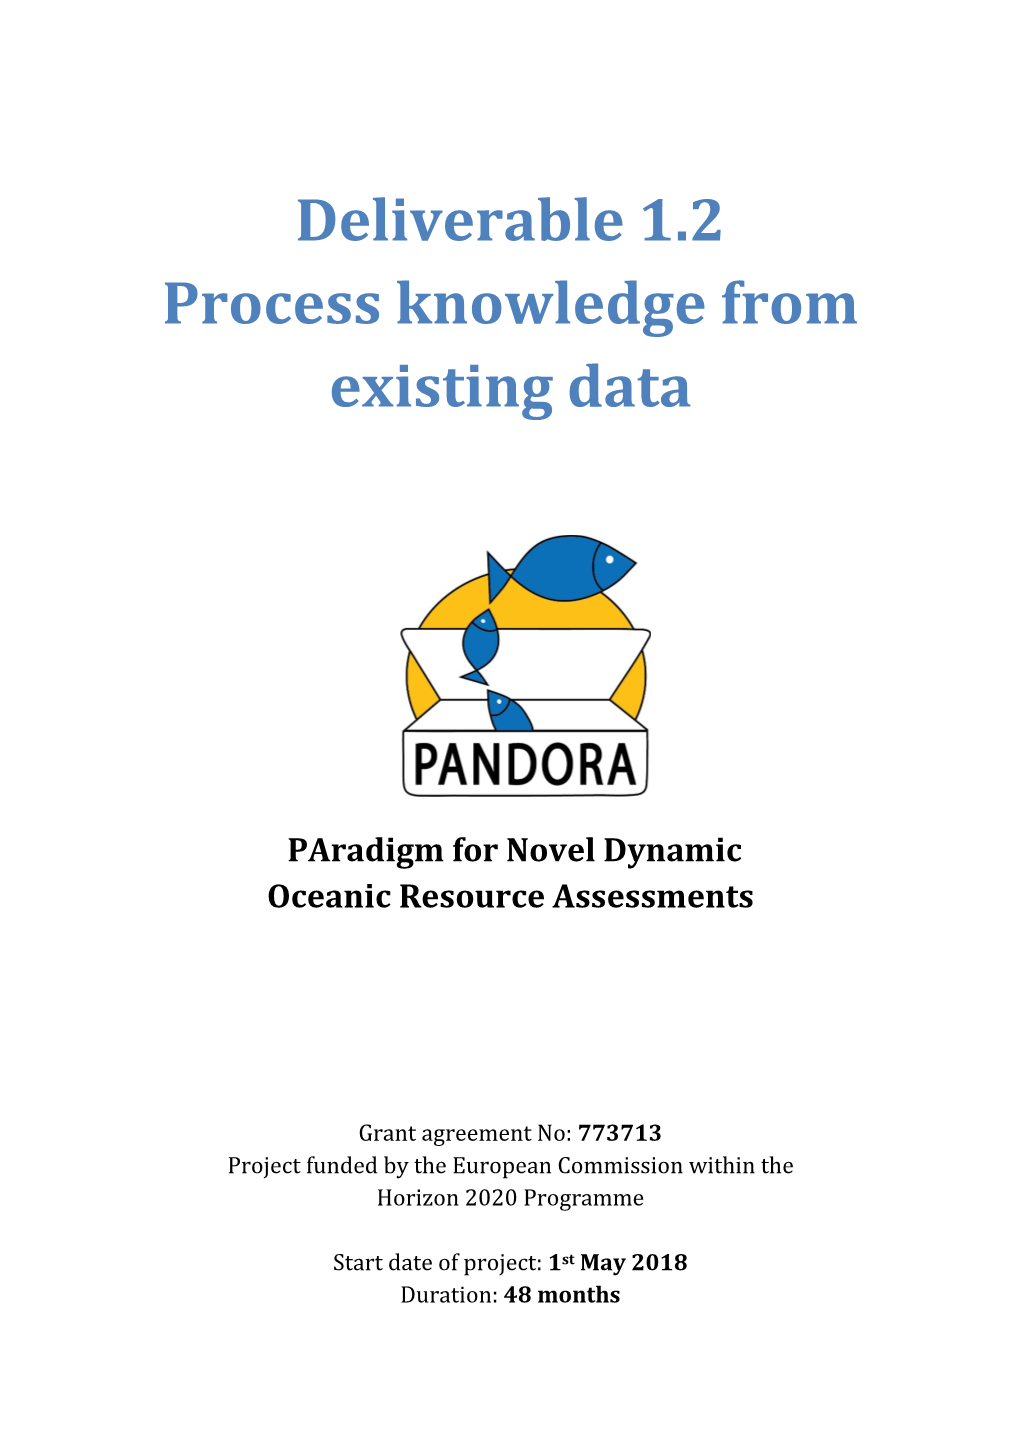 Deliverable 1.2 Process Knowledge from Existing Data